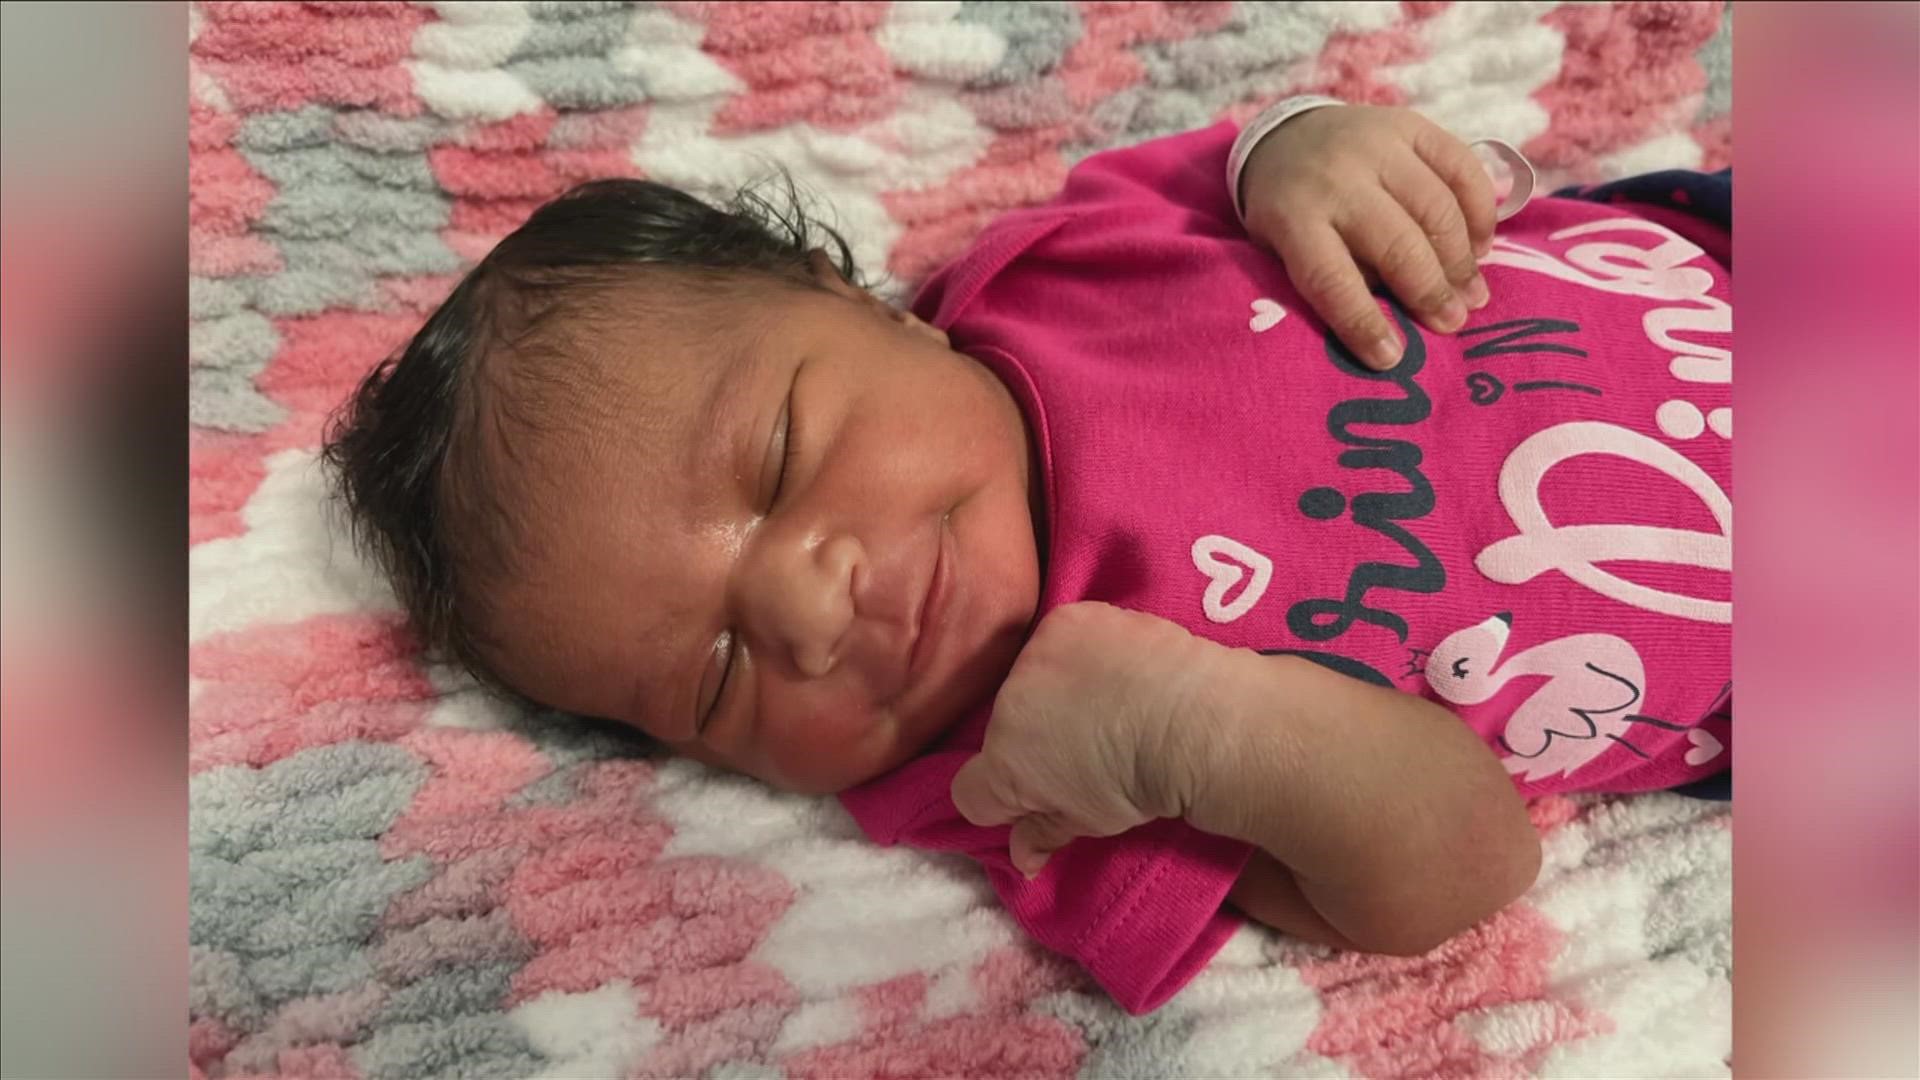 Weighing six pounds and 13 ounces, Iyanna Latrice Gibson was born at midnight on New Year's Eve.